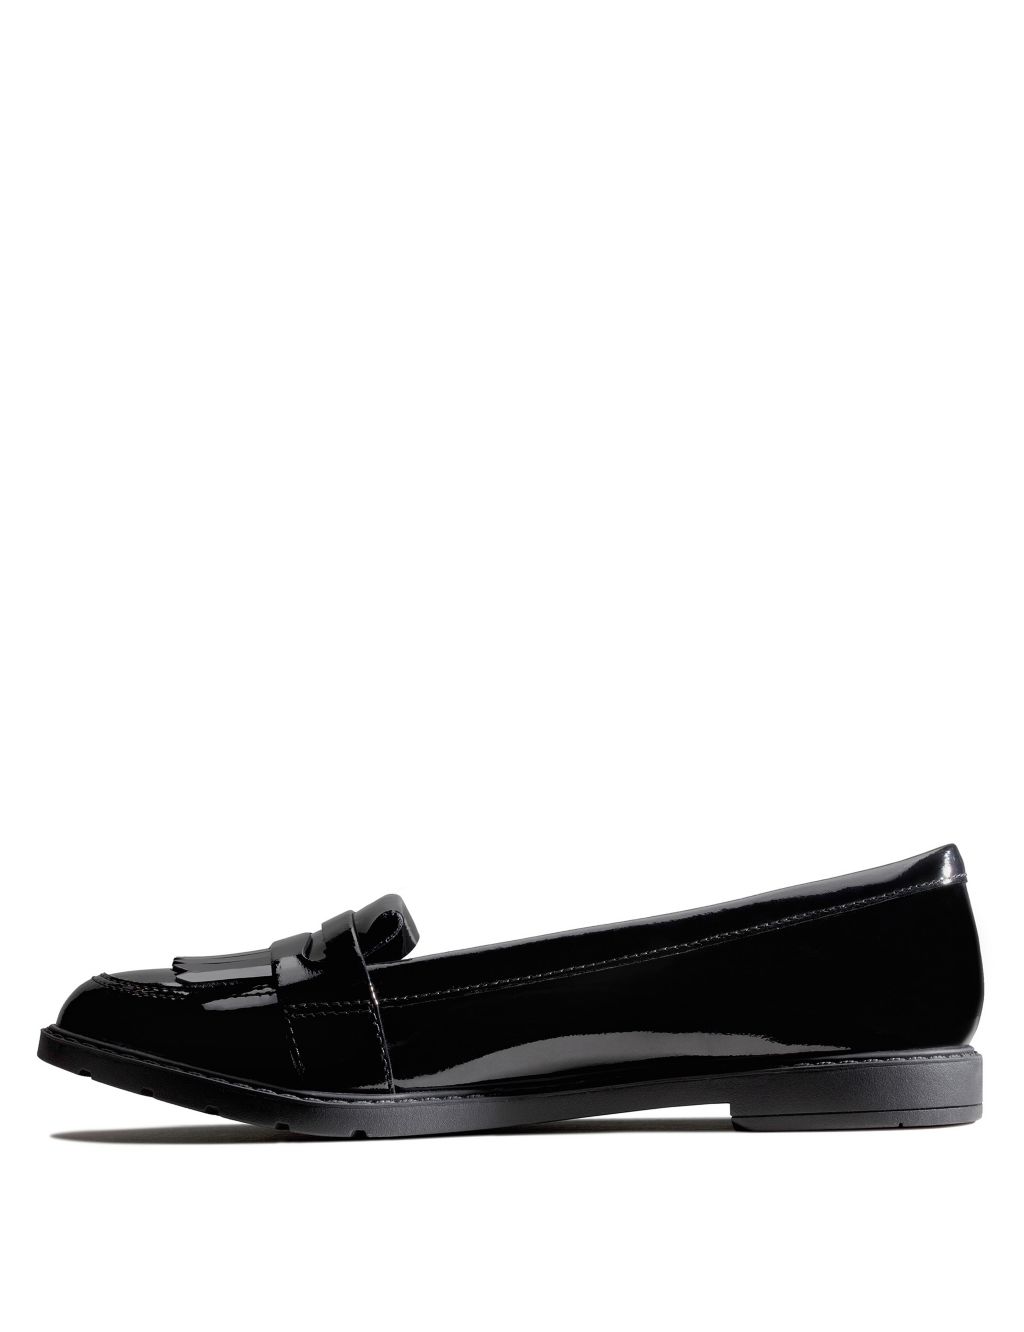 Kids' Leather Slip-on Loafers (Youth size 3-8) image 3